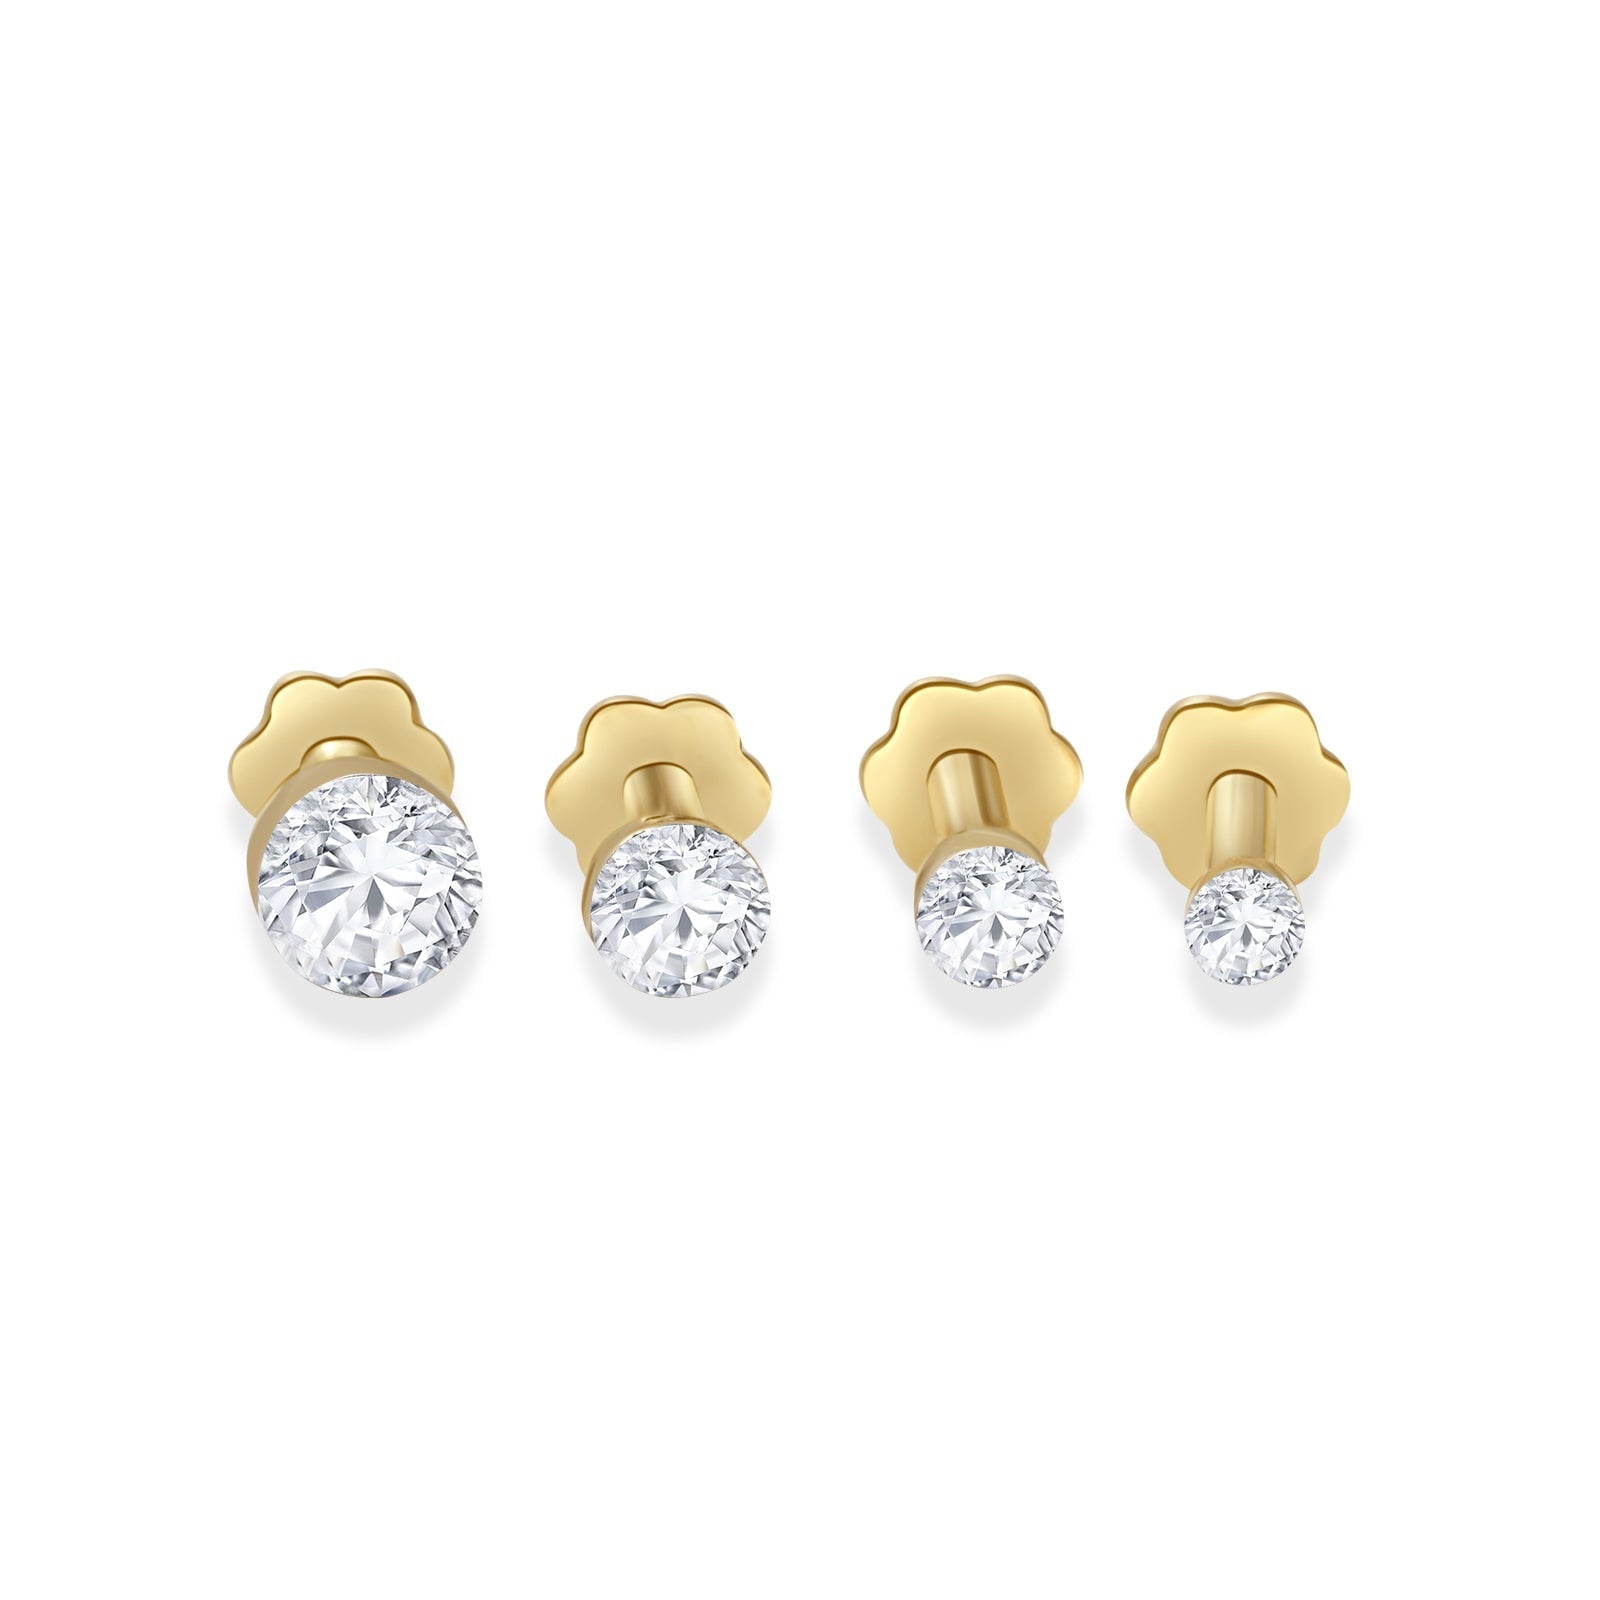 Invisible Set Floating Round Diamond Flat Back Stud Earrings Estella Collection 18217 14k April Birthstone Birthstone #tag4# #tag5# #tag6# #tag7# #tag8# #tag9# #tag10# 14k Yellow Gold 0.03 ct 5MM